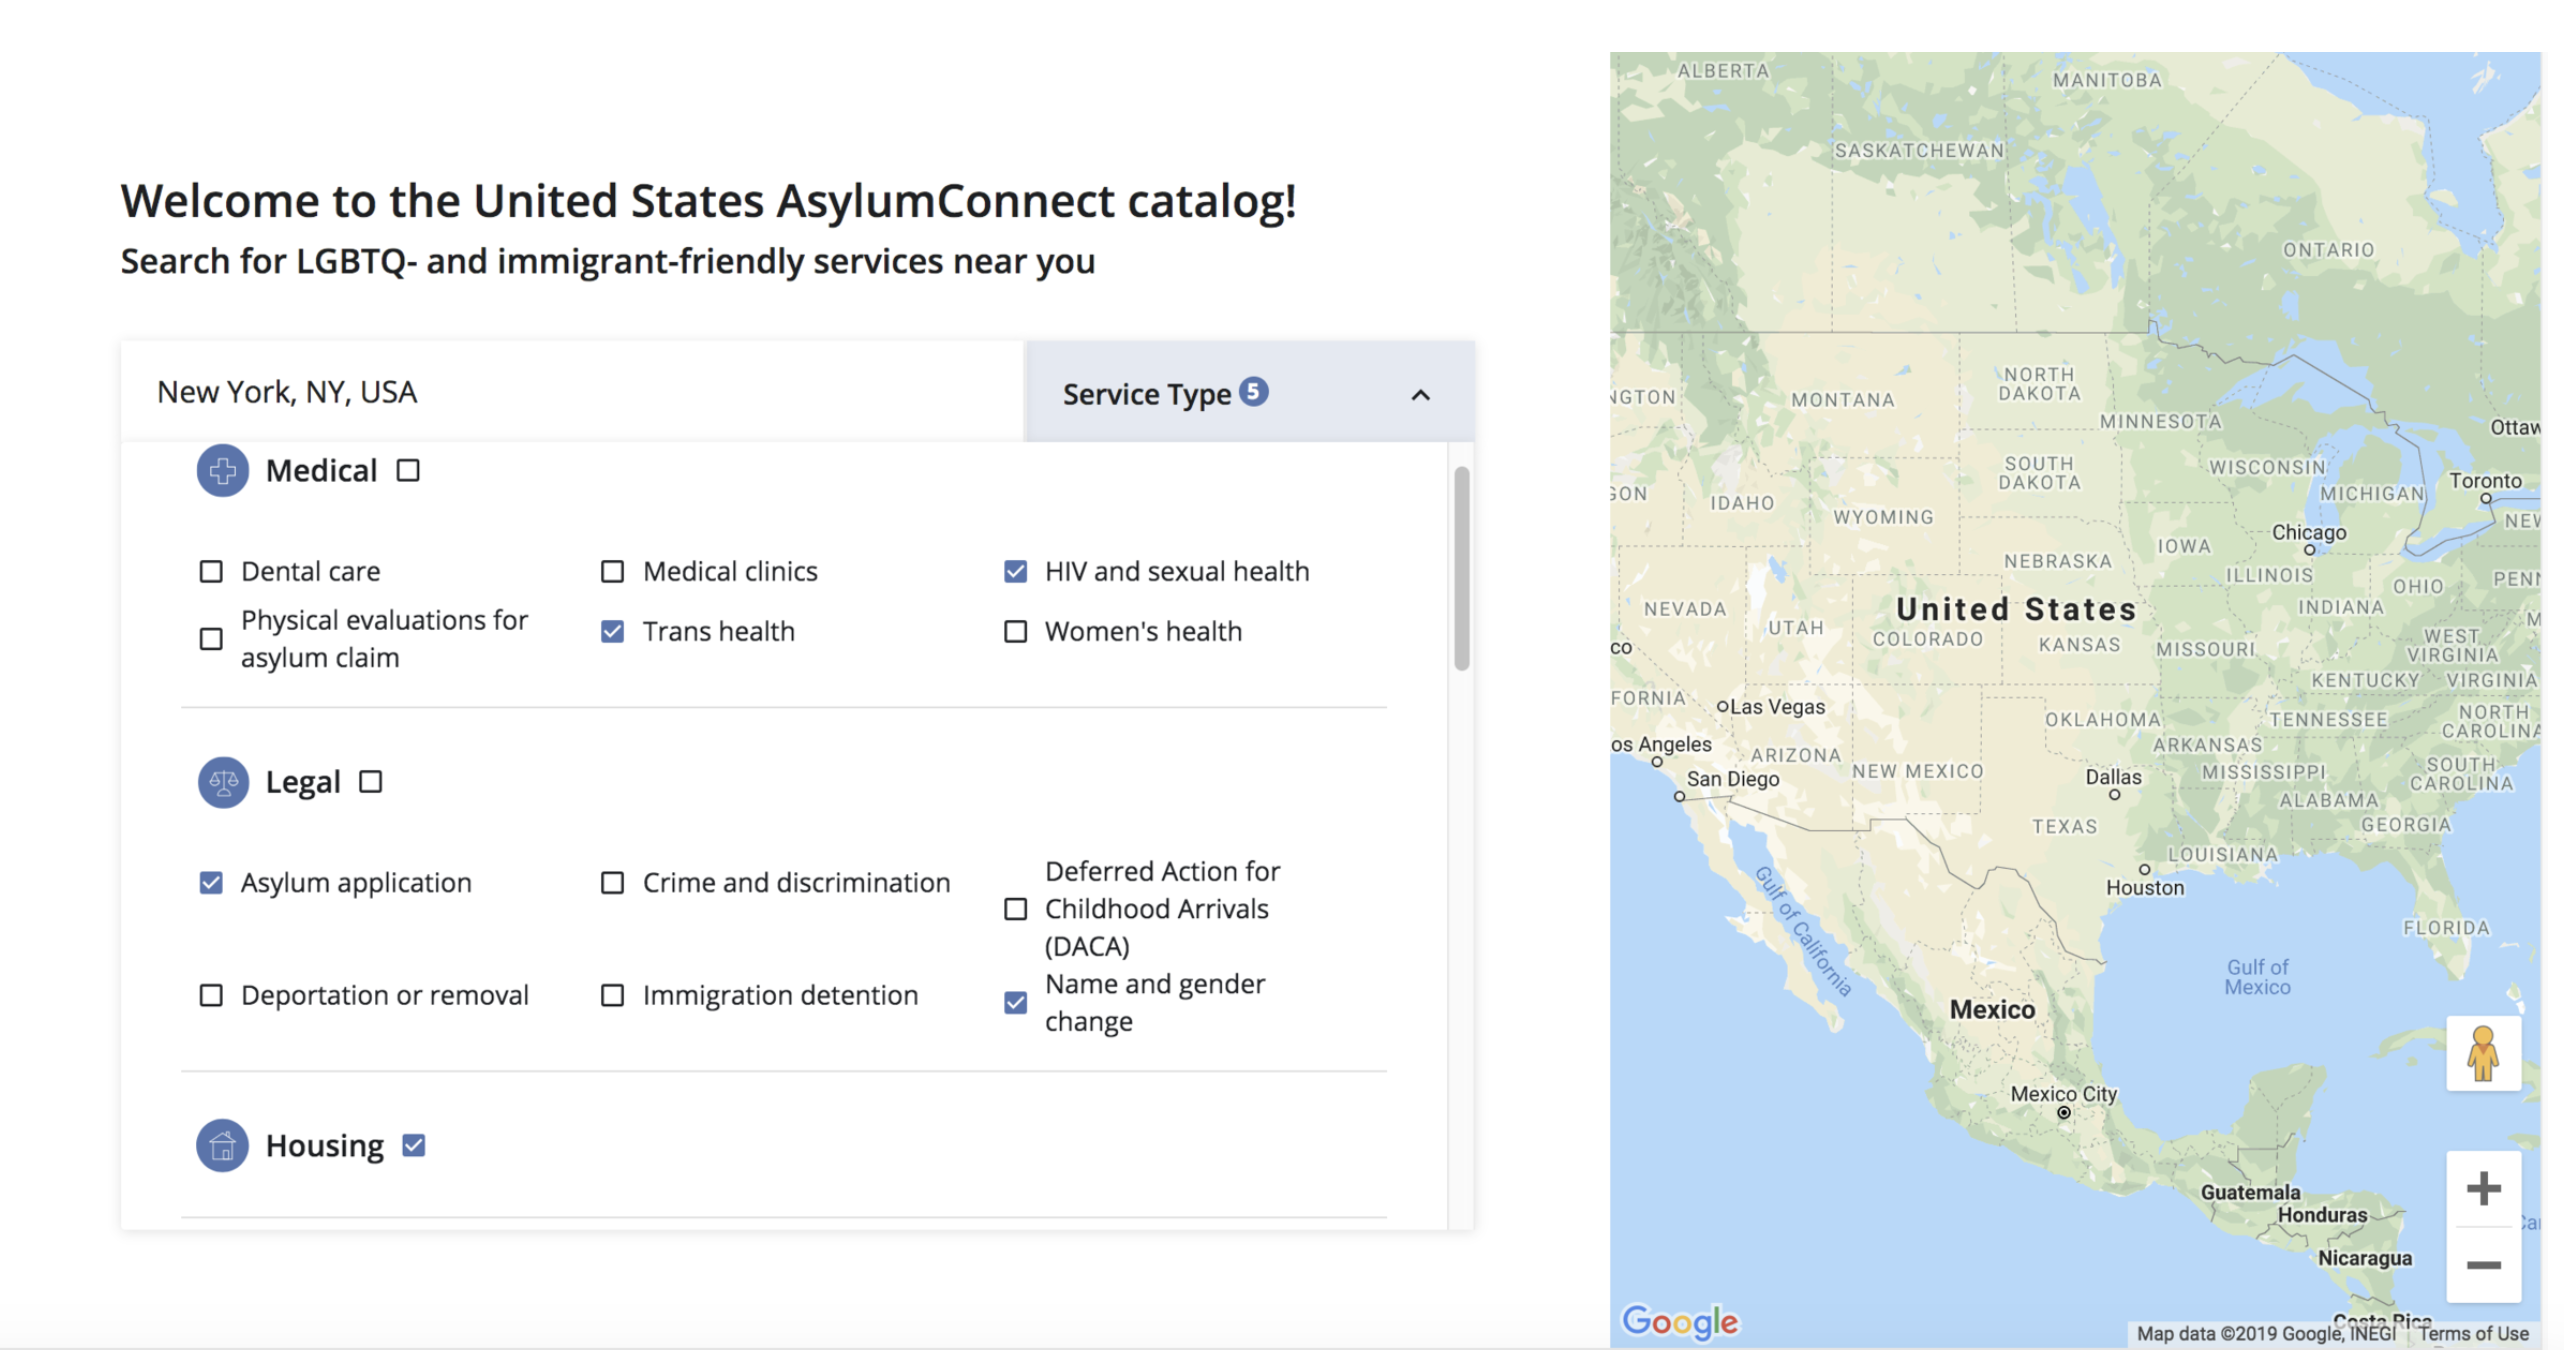 A screenshot of AsylumConnect website and catalog with a map of the United States.